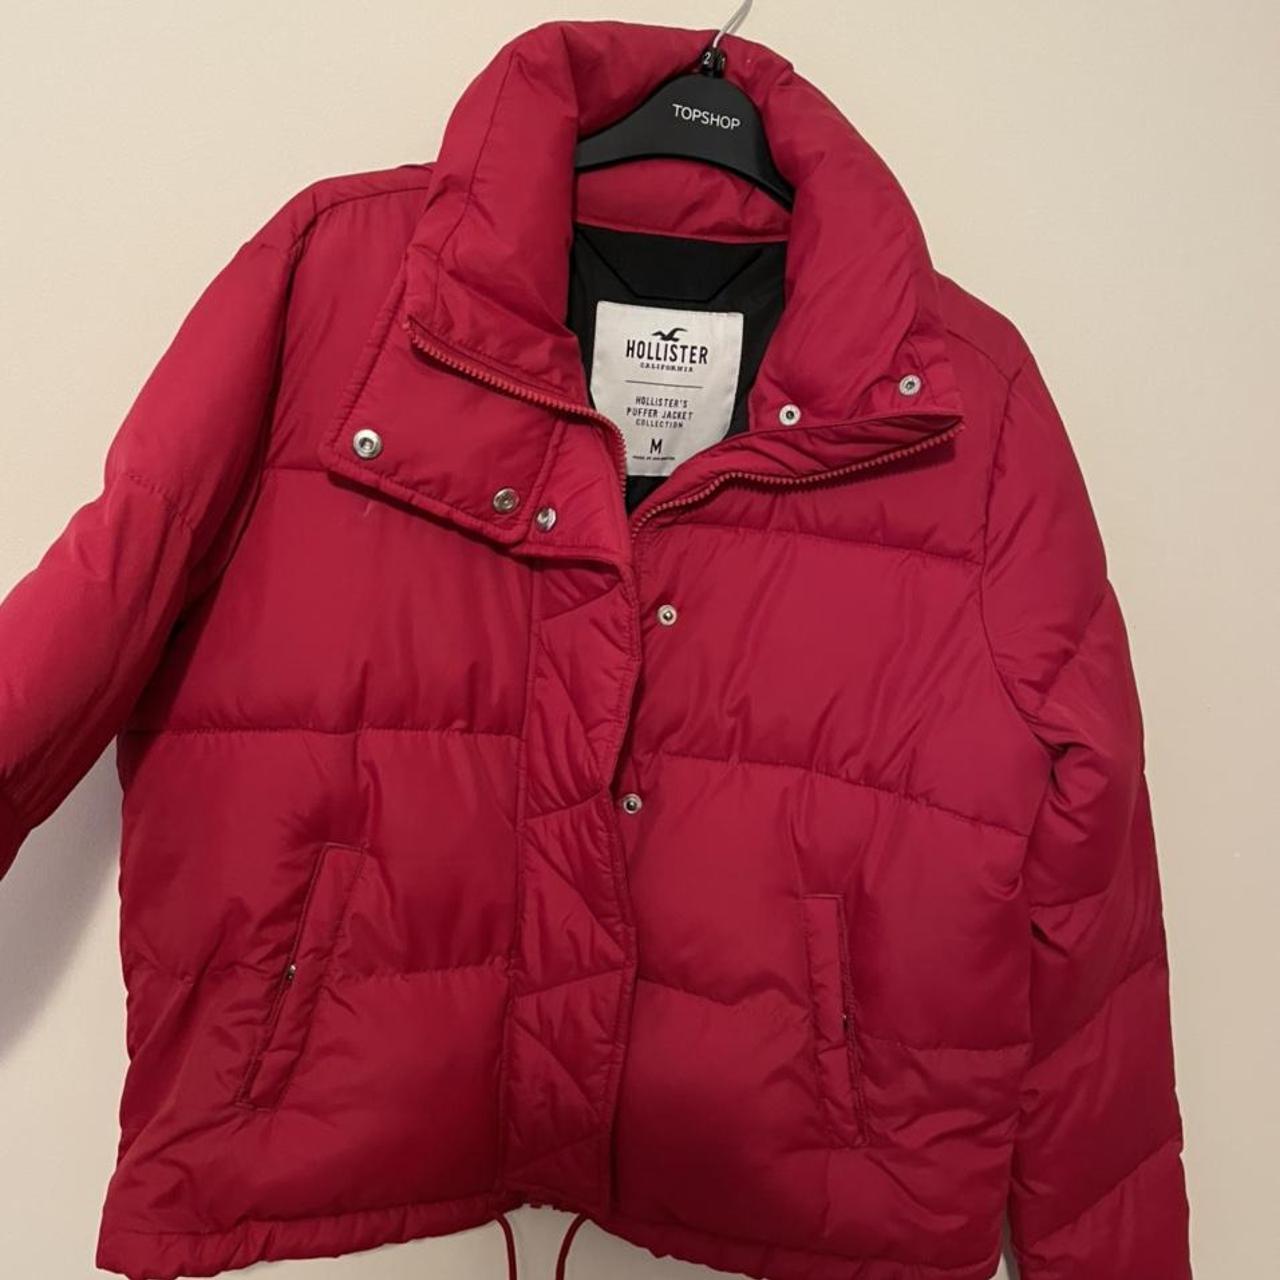 Hollister Puffer Jacket Red Size L - $18 (72% Off Retail) - From Tiana